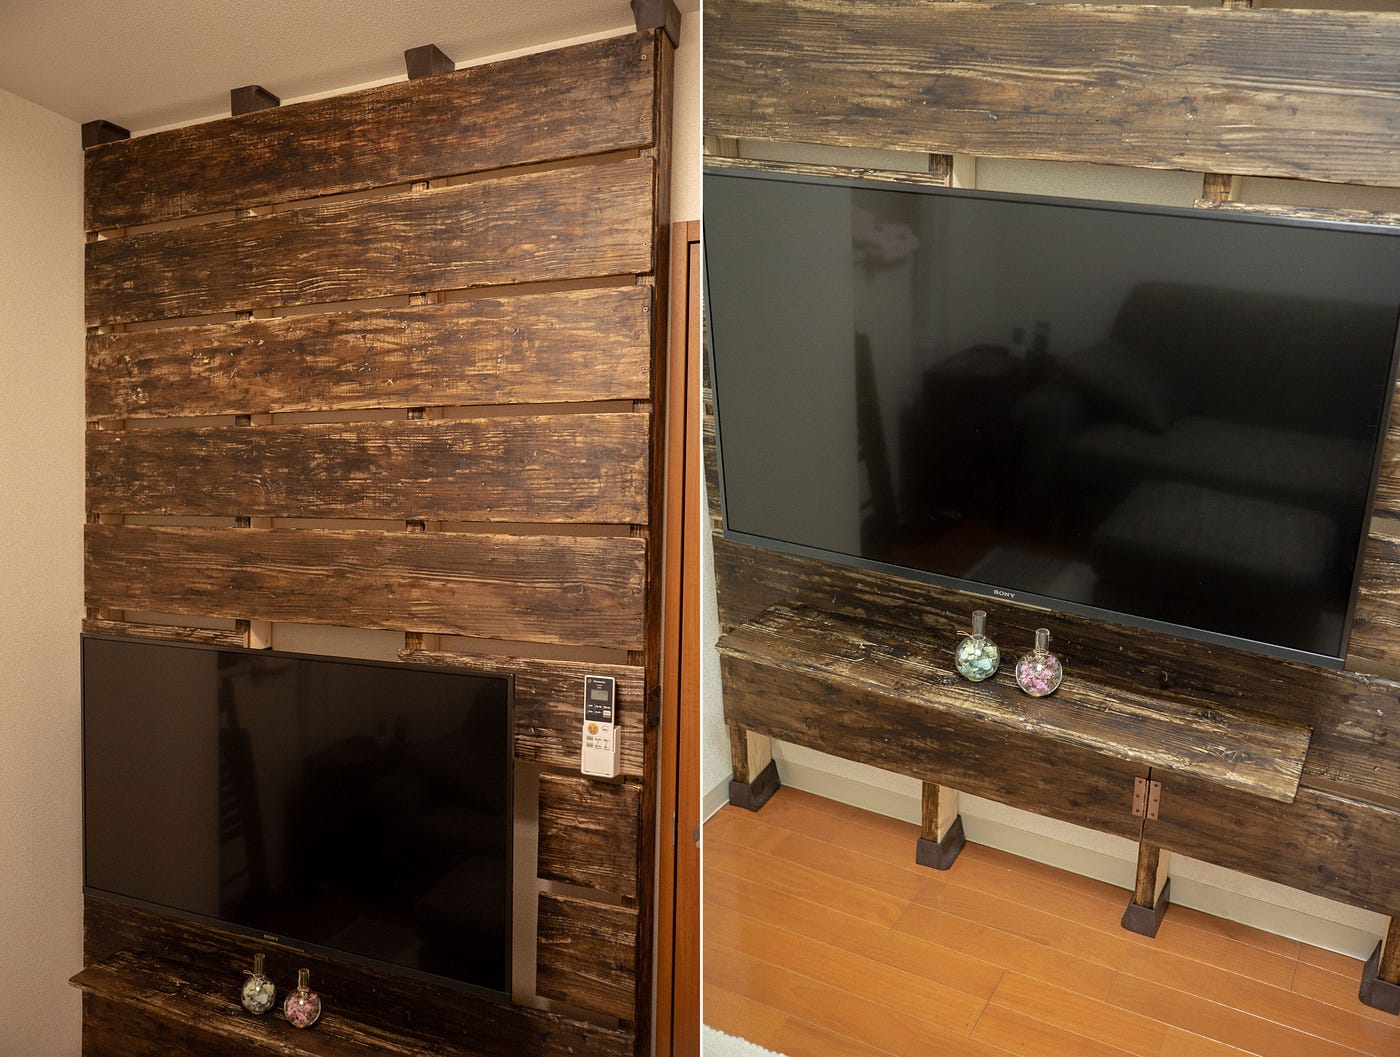 A DIY Wooden Wall with TV Mount. My recent DIY work is to build a wooden… |  by Takuya Matsuyama | Carefully Cut Corners | Medium